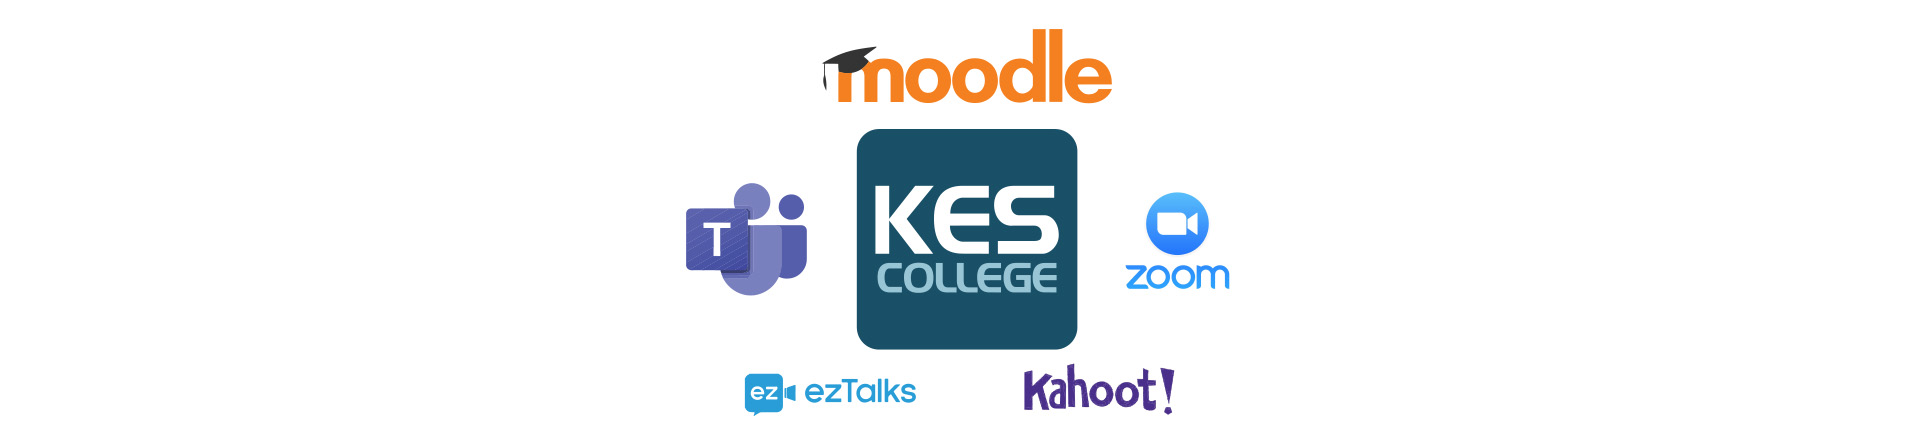 KES College Teacher Training in E-learning and Mixed Learning